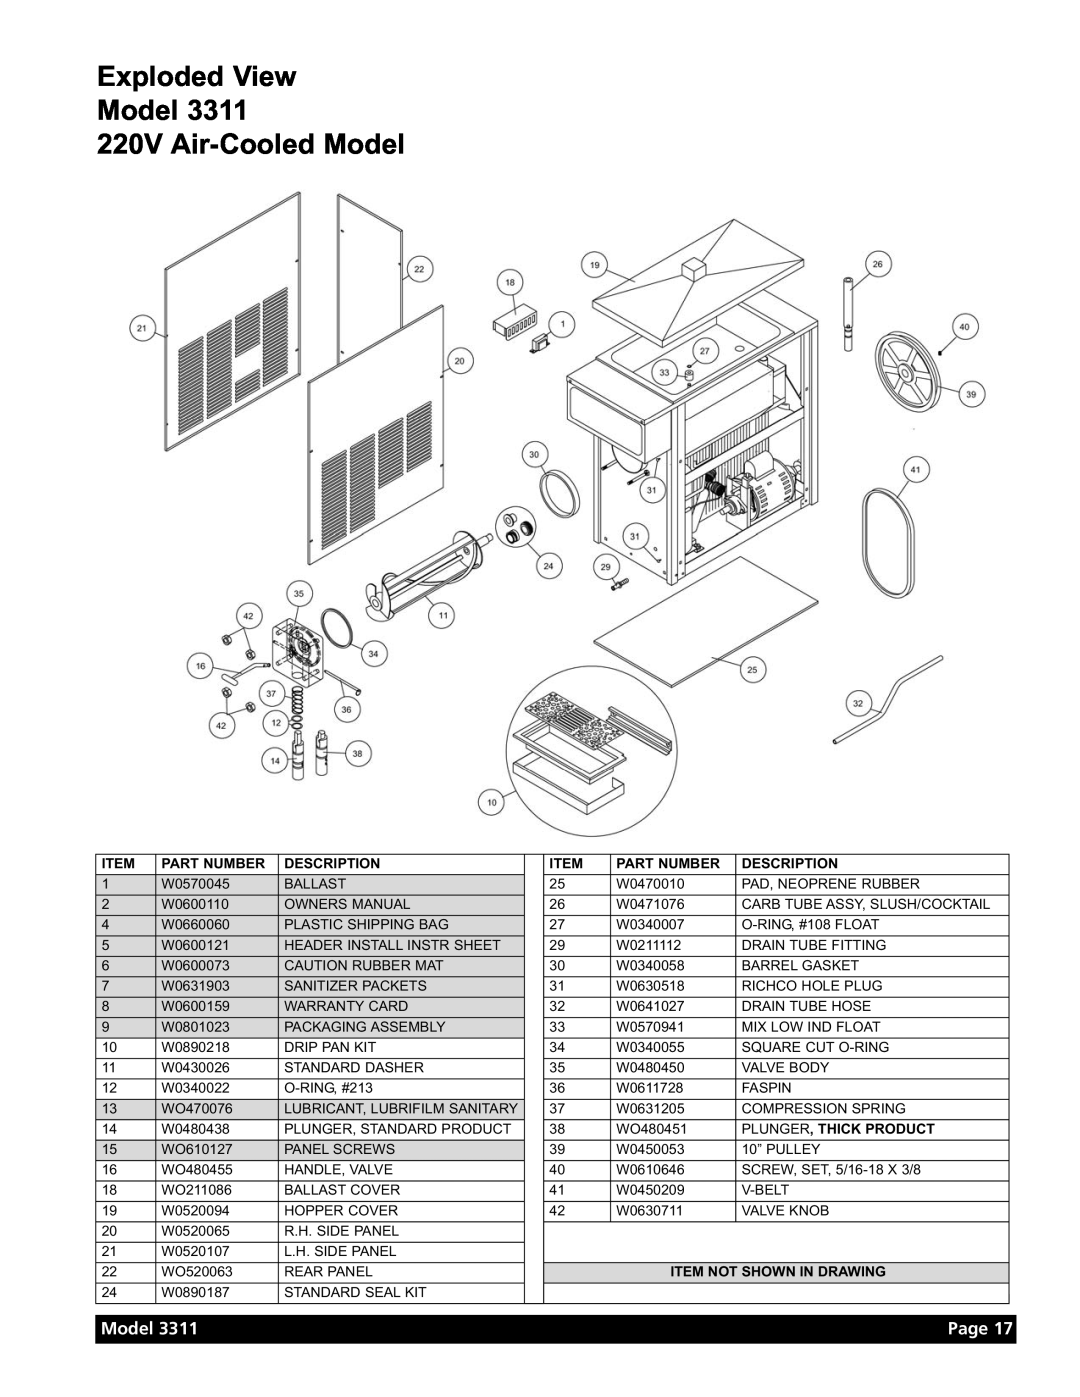 Grindmaster Model 3311 Exploded View Model 220V Air-Cooled Model, Page, Part Number, Description, Plunger, Thick Product 